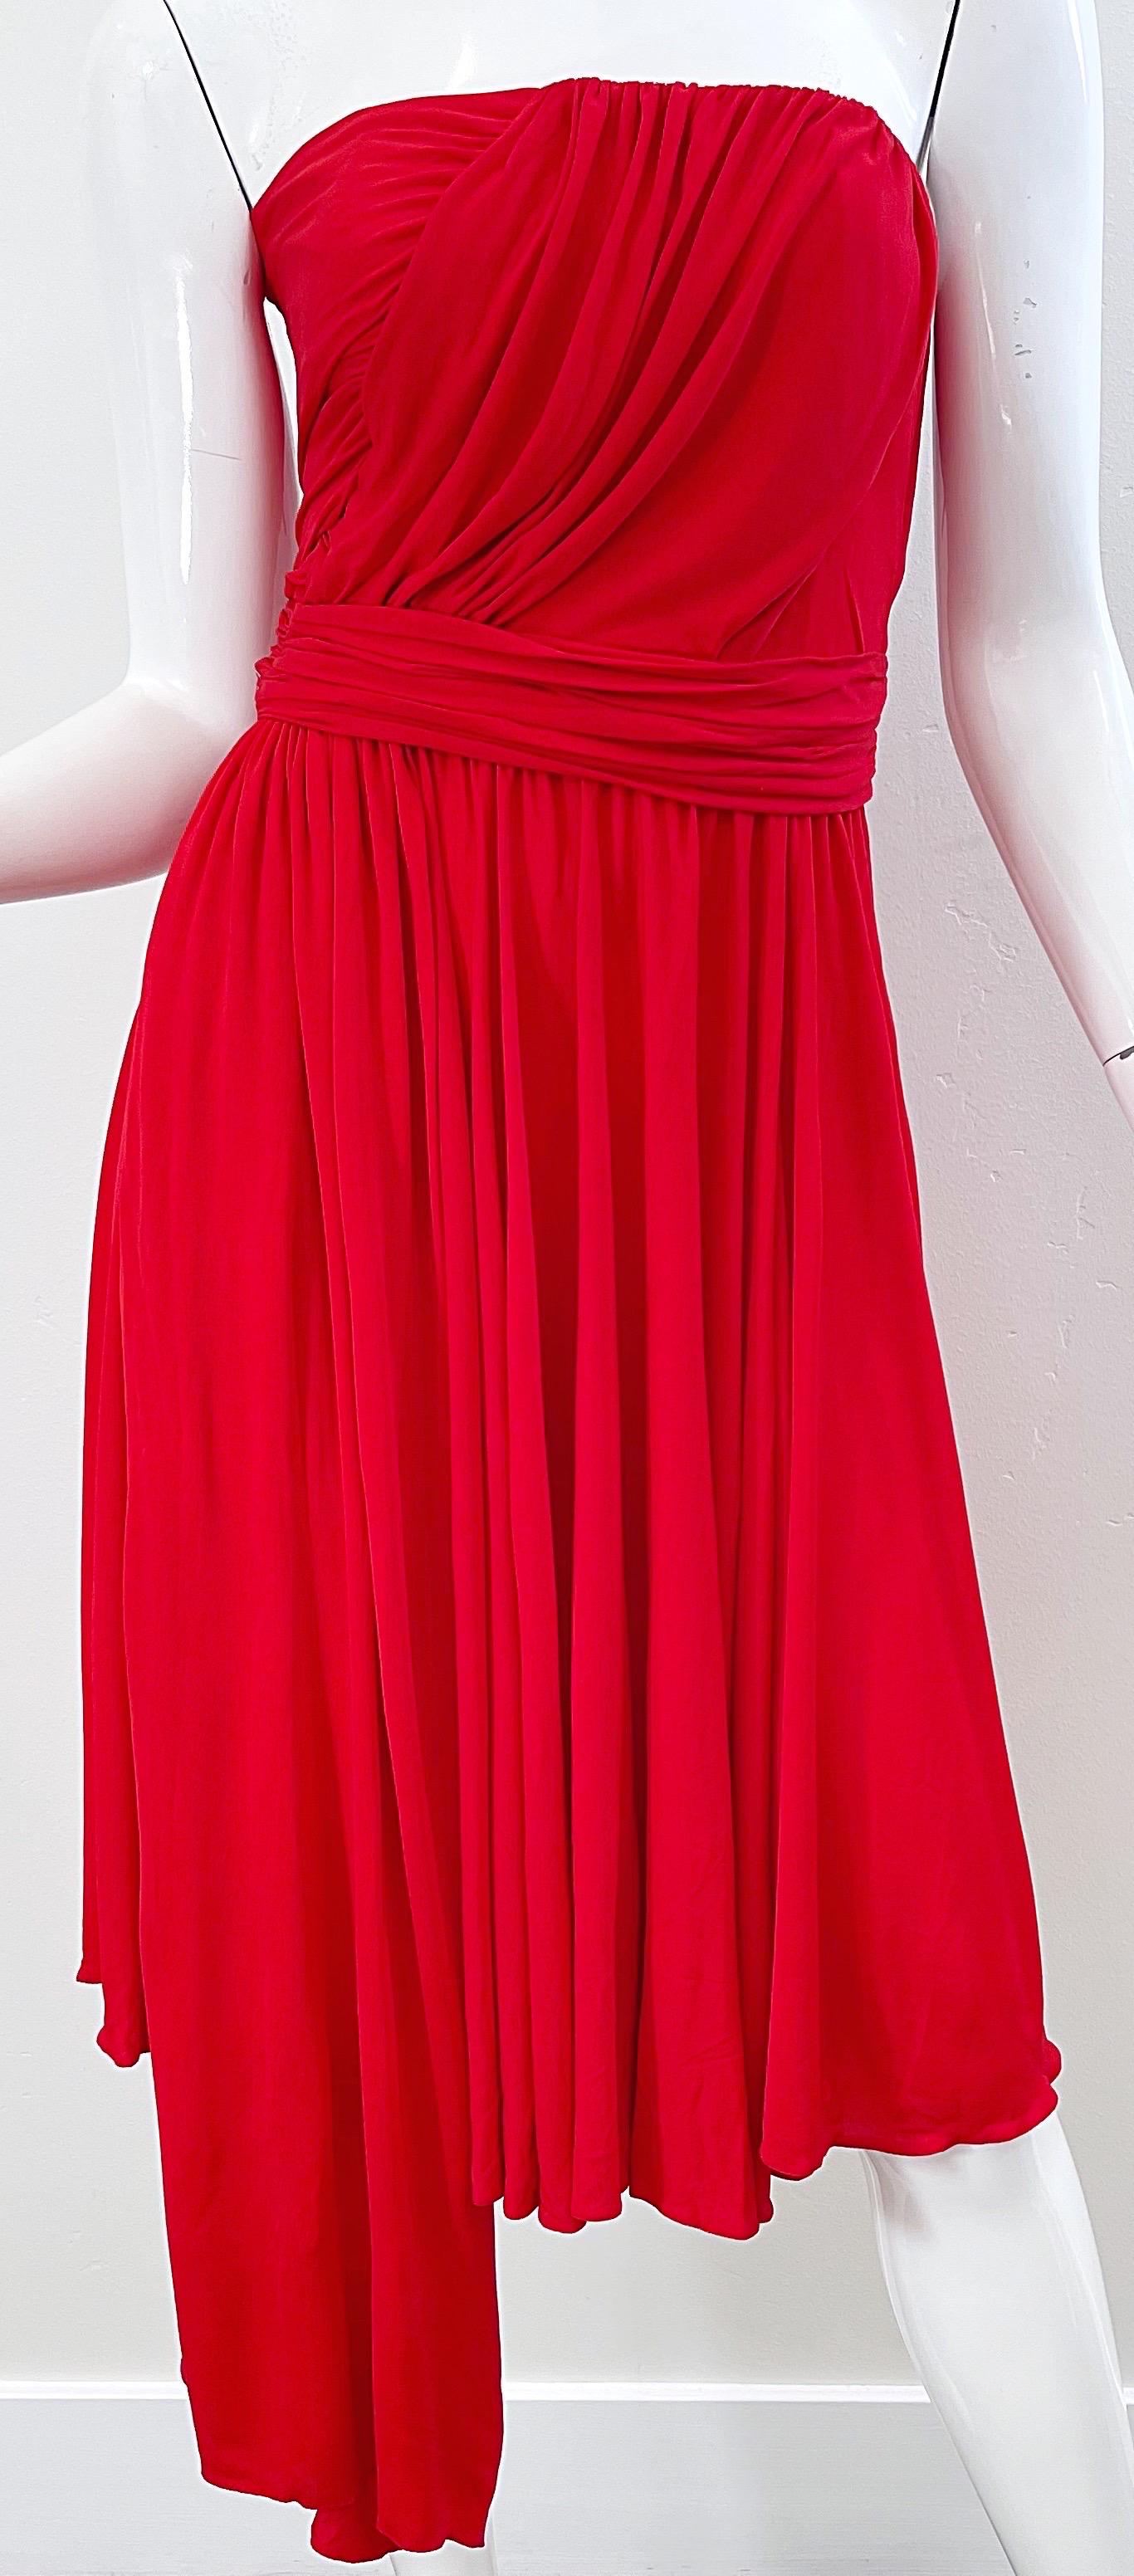 Women's Runway Yves Saint Laurent S/S 1989 Lipstick Red Rayon Jersey Strapless 80s Dress For Sale